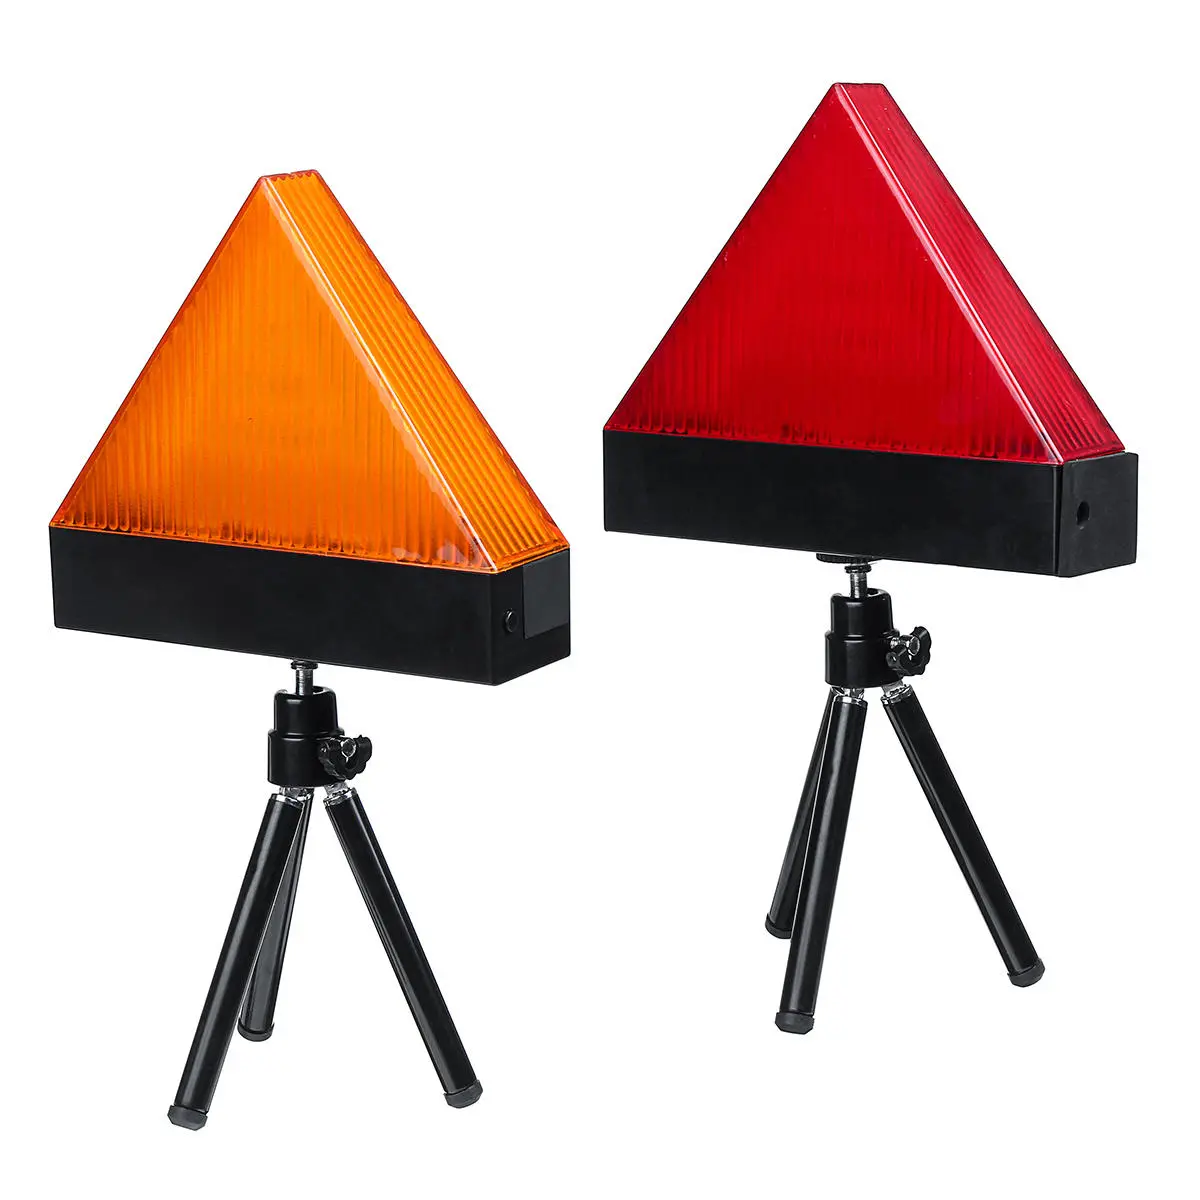 Universal rechargeable led car triangle warning strobe lights red/yellow with tripod emergency security flash